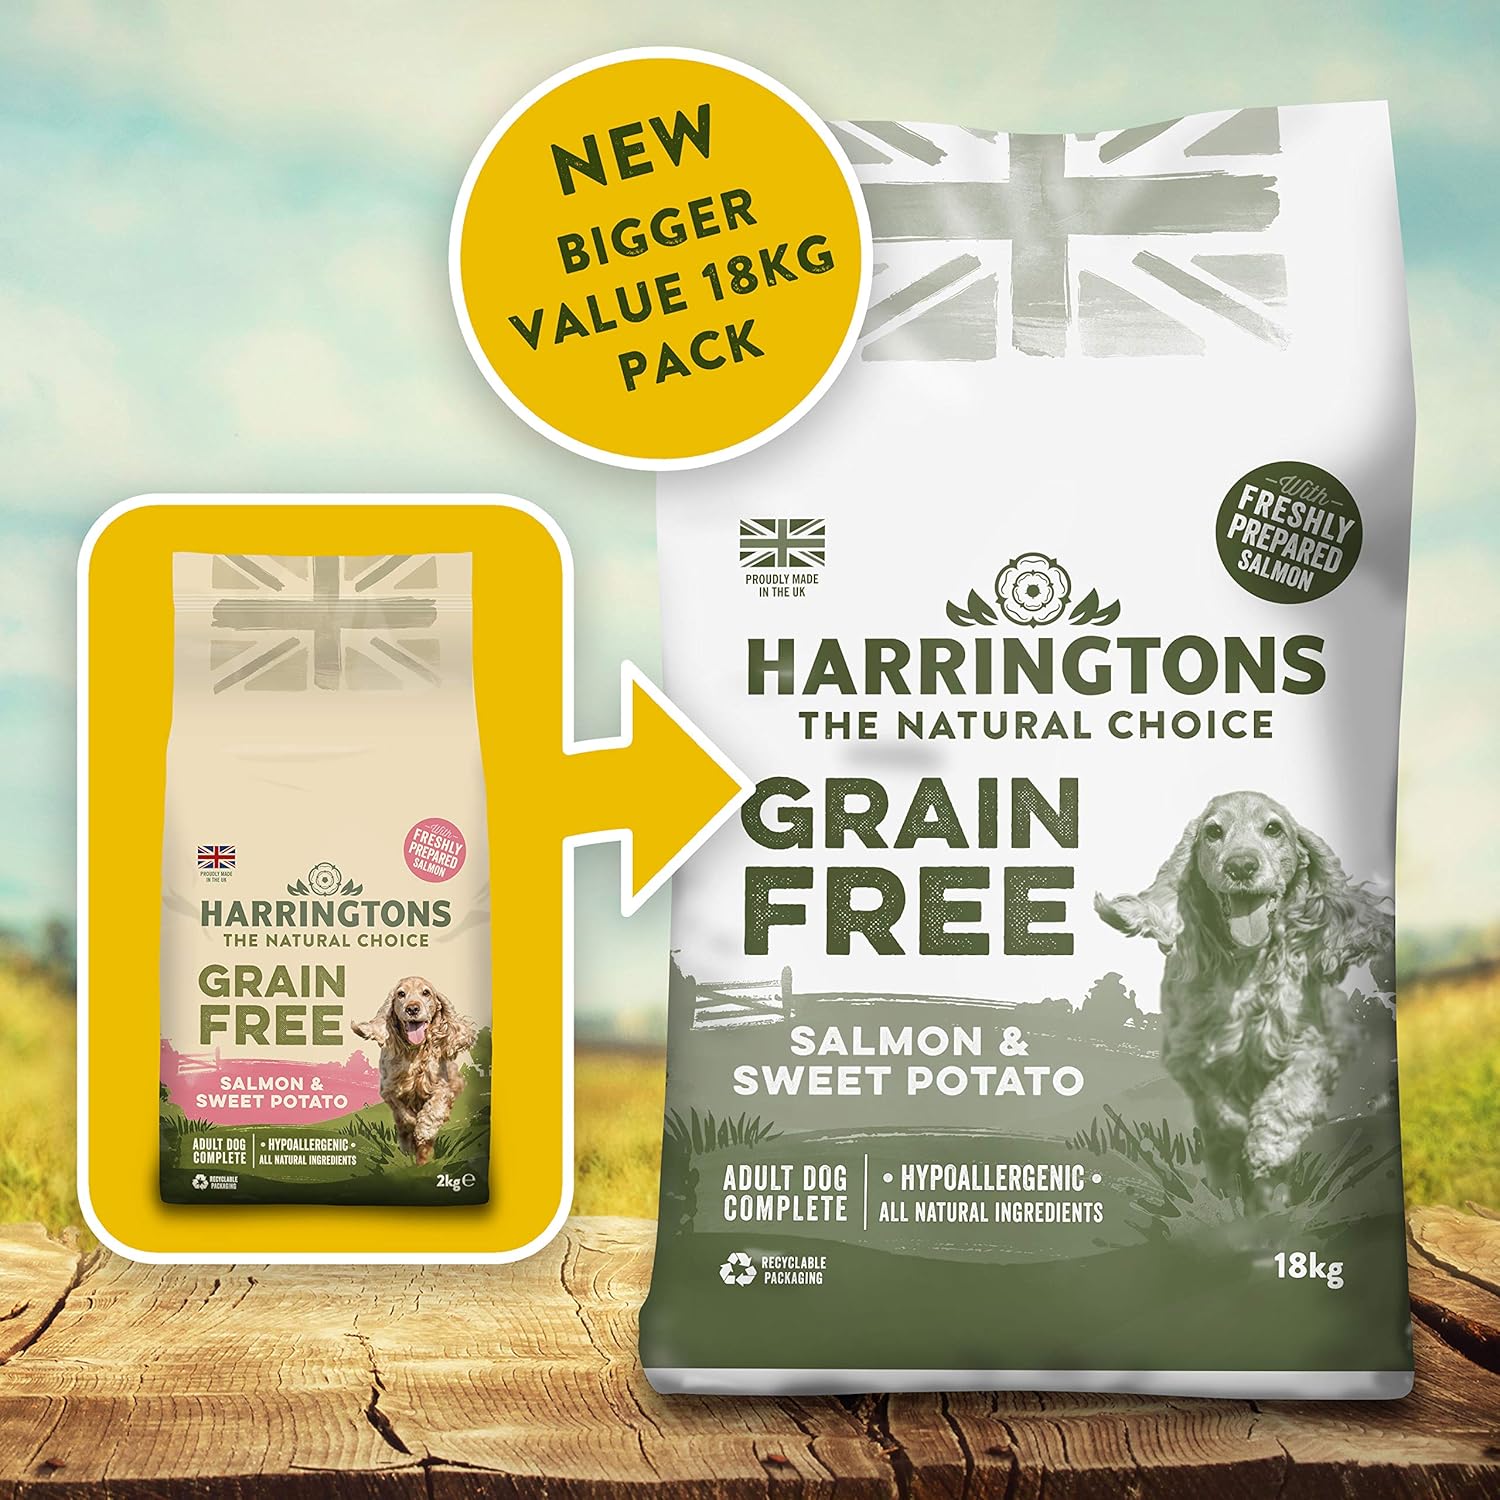 Harringtons Complete Grain Free Hypoallergenic Salmon & Sweet Potato Dry Dog Food 18kg - Made with All Natural Ingredients?GFHYPS-18